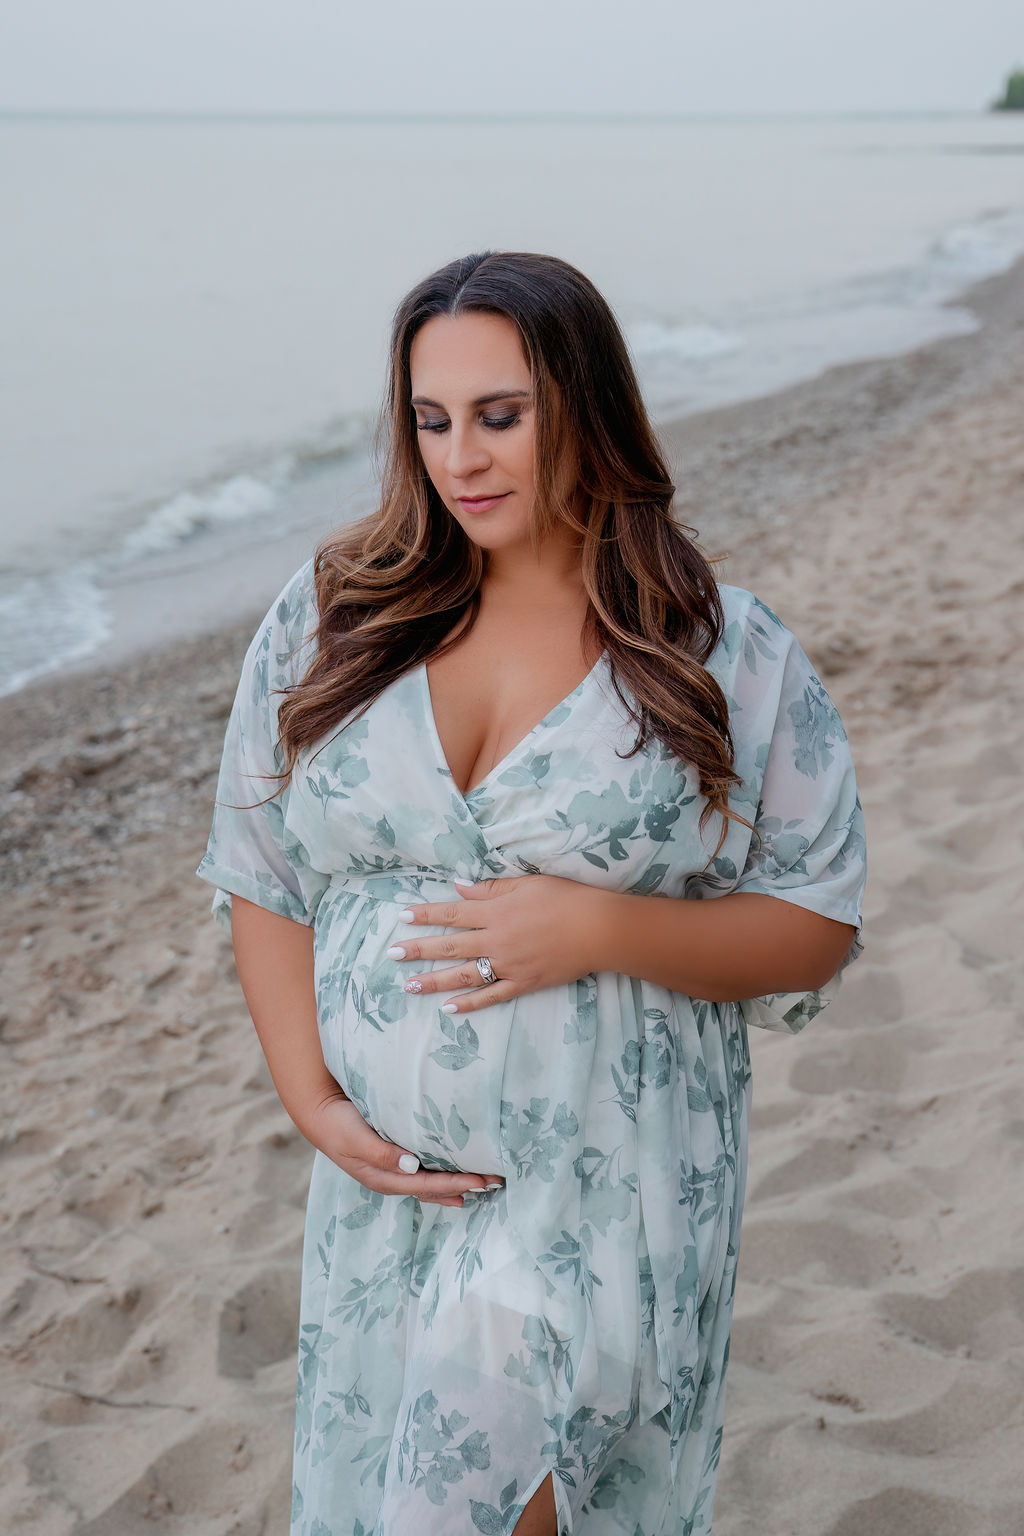 A mother to be in a blue floral print dress stands on a beach smiling down at her bump after visiting birthing centers in milwaukee wi